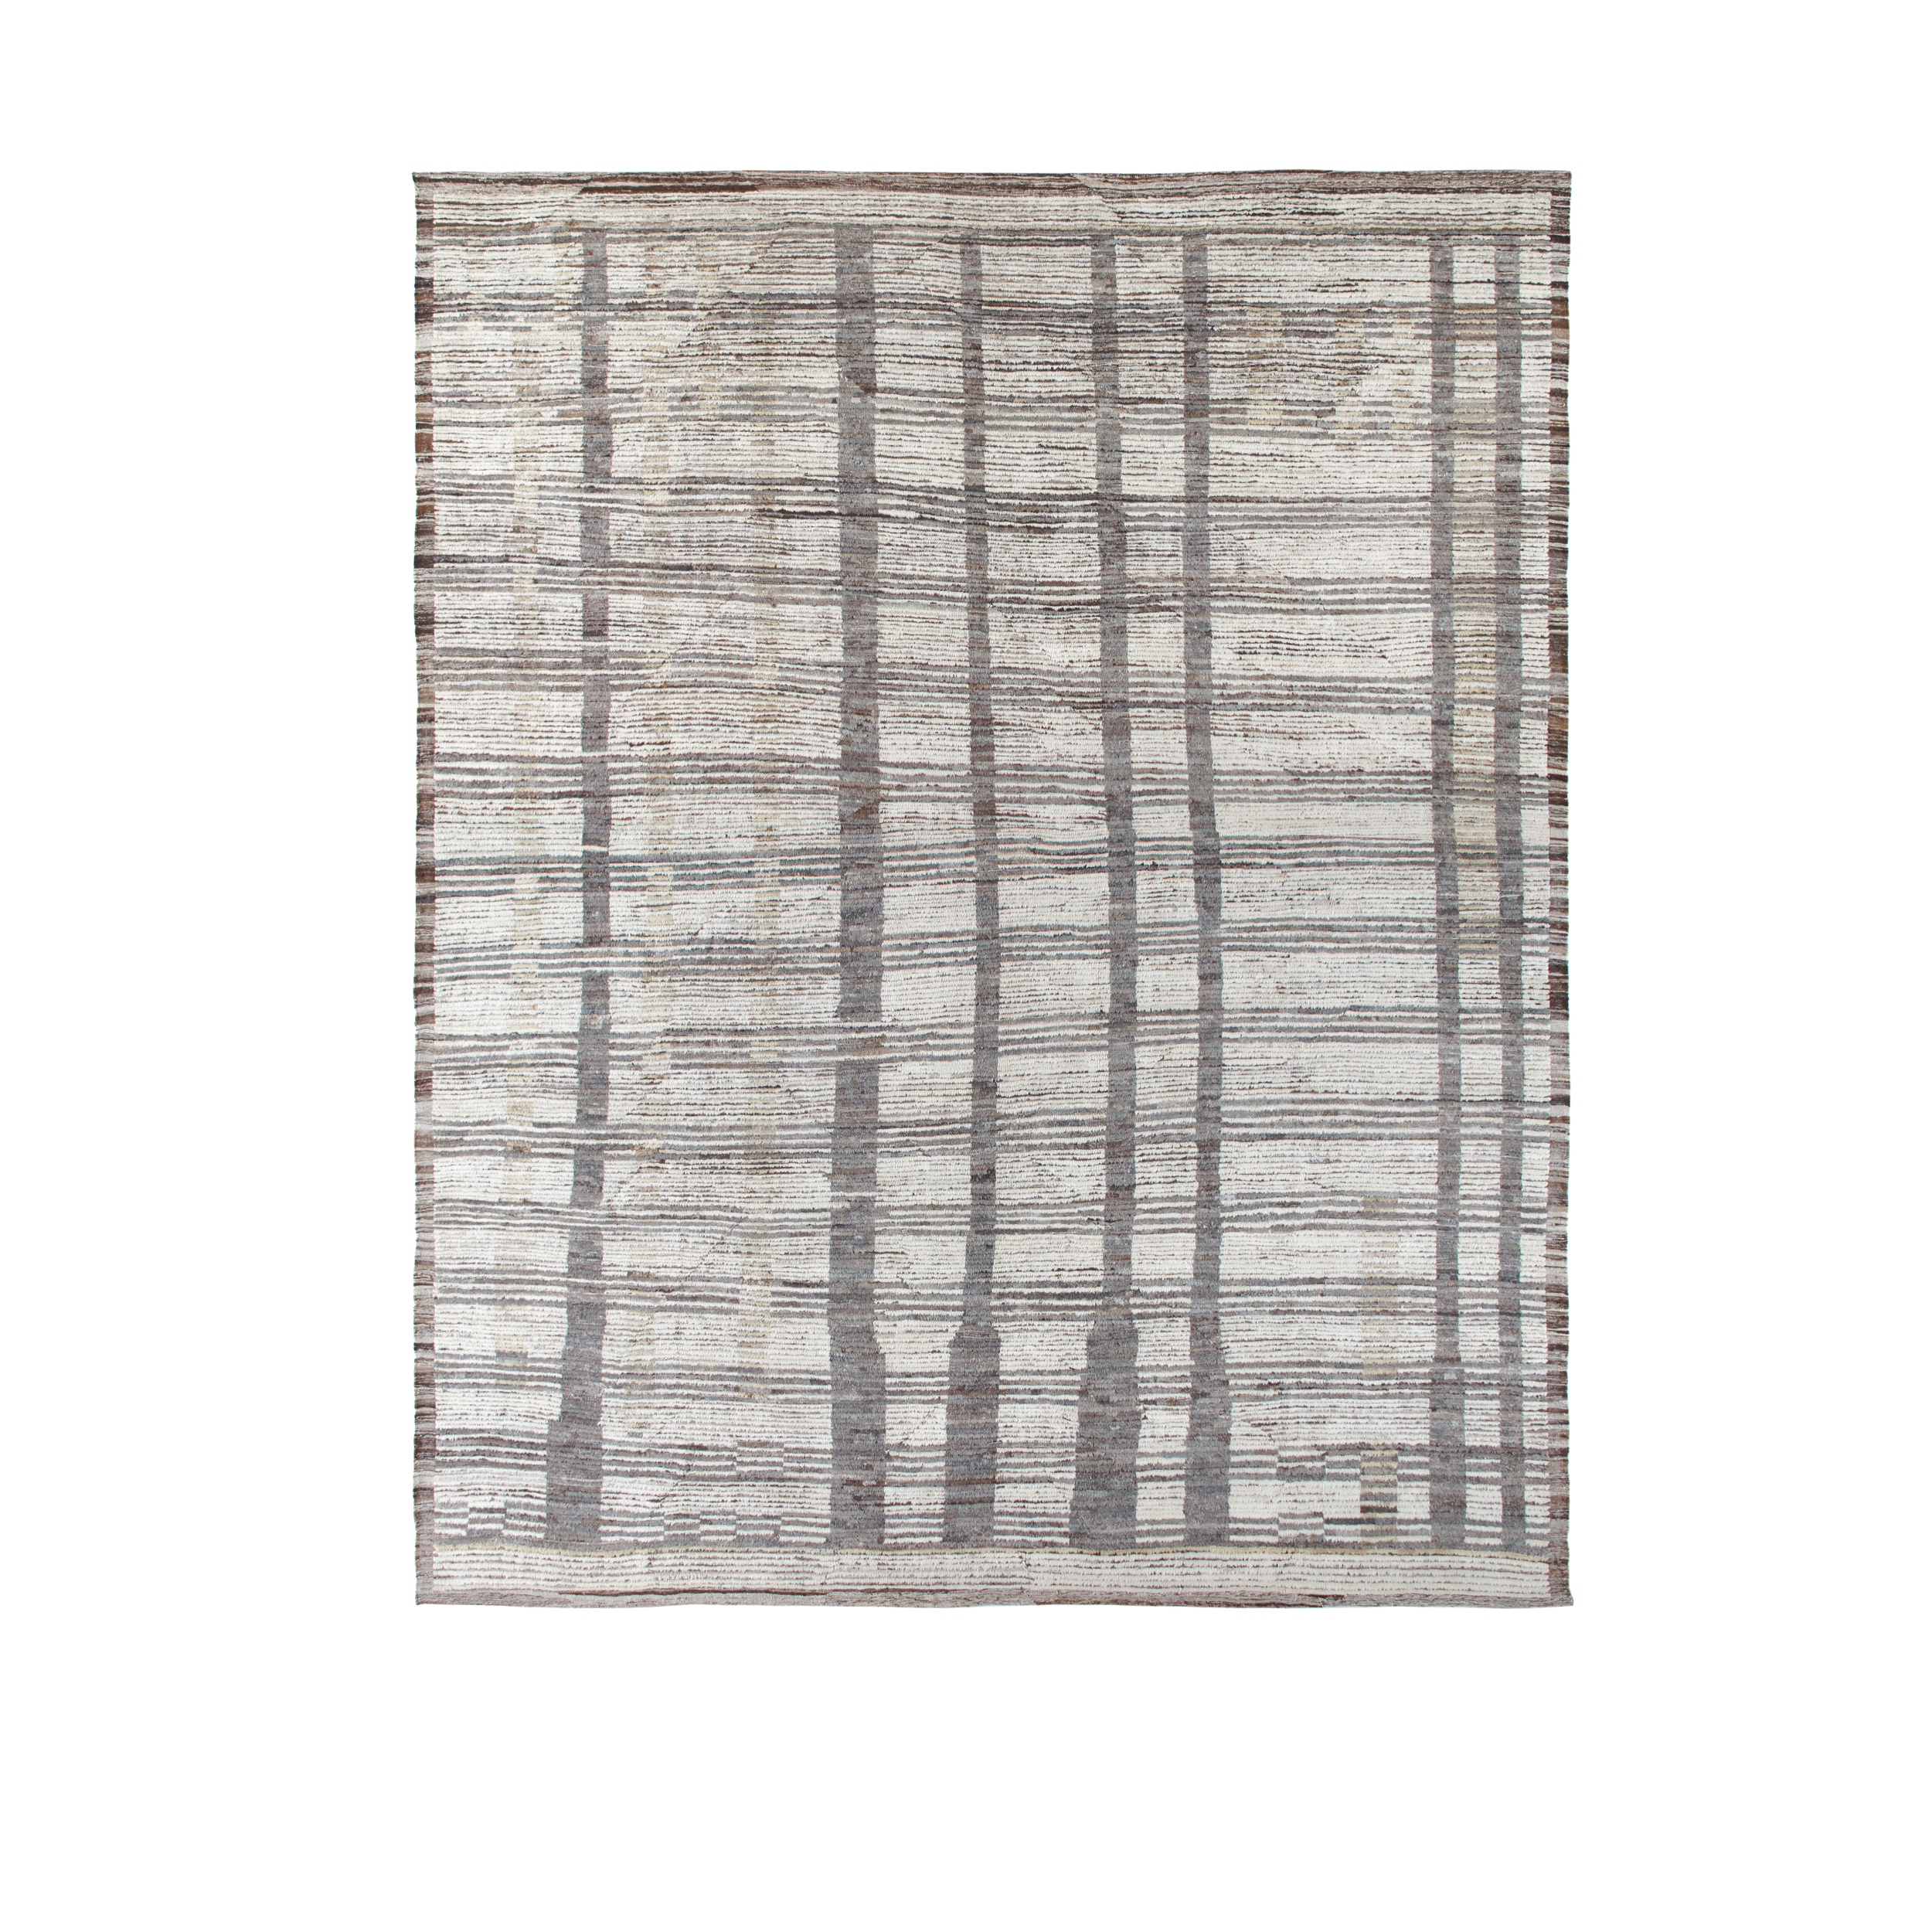 Milan rug is a modern beige colored rug made from 100% handspun wool and natural dyes. 